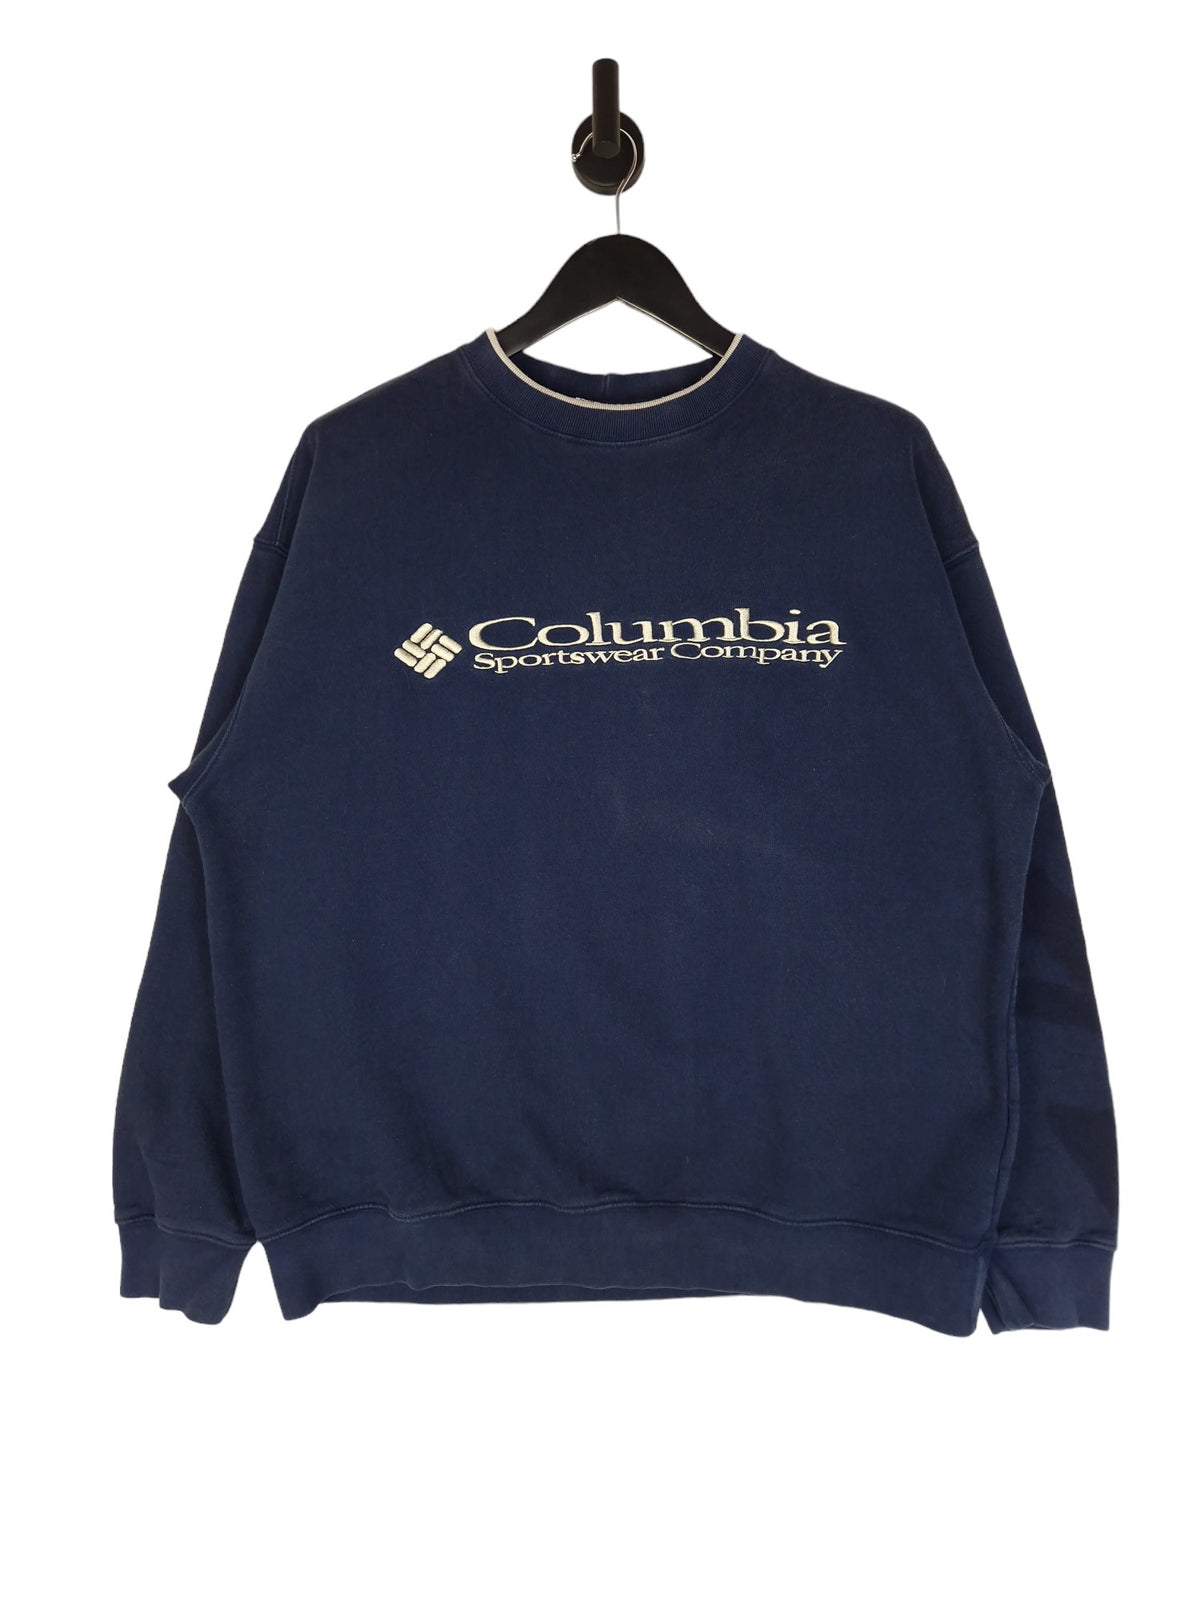 90's Columbia Spell Out Sweatshirt - Size XL